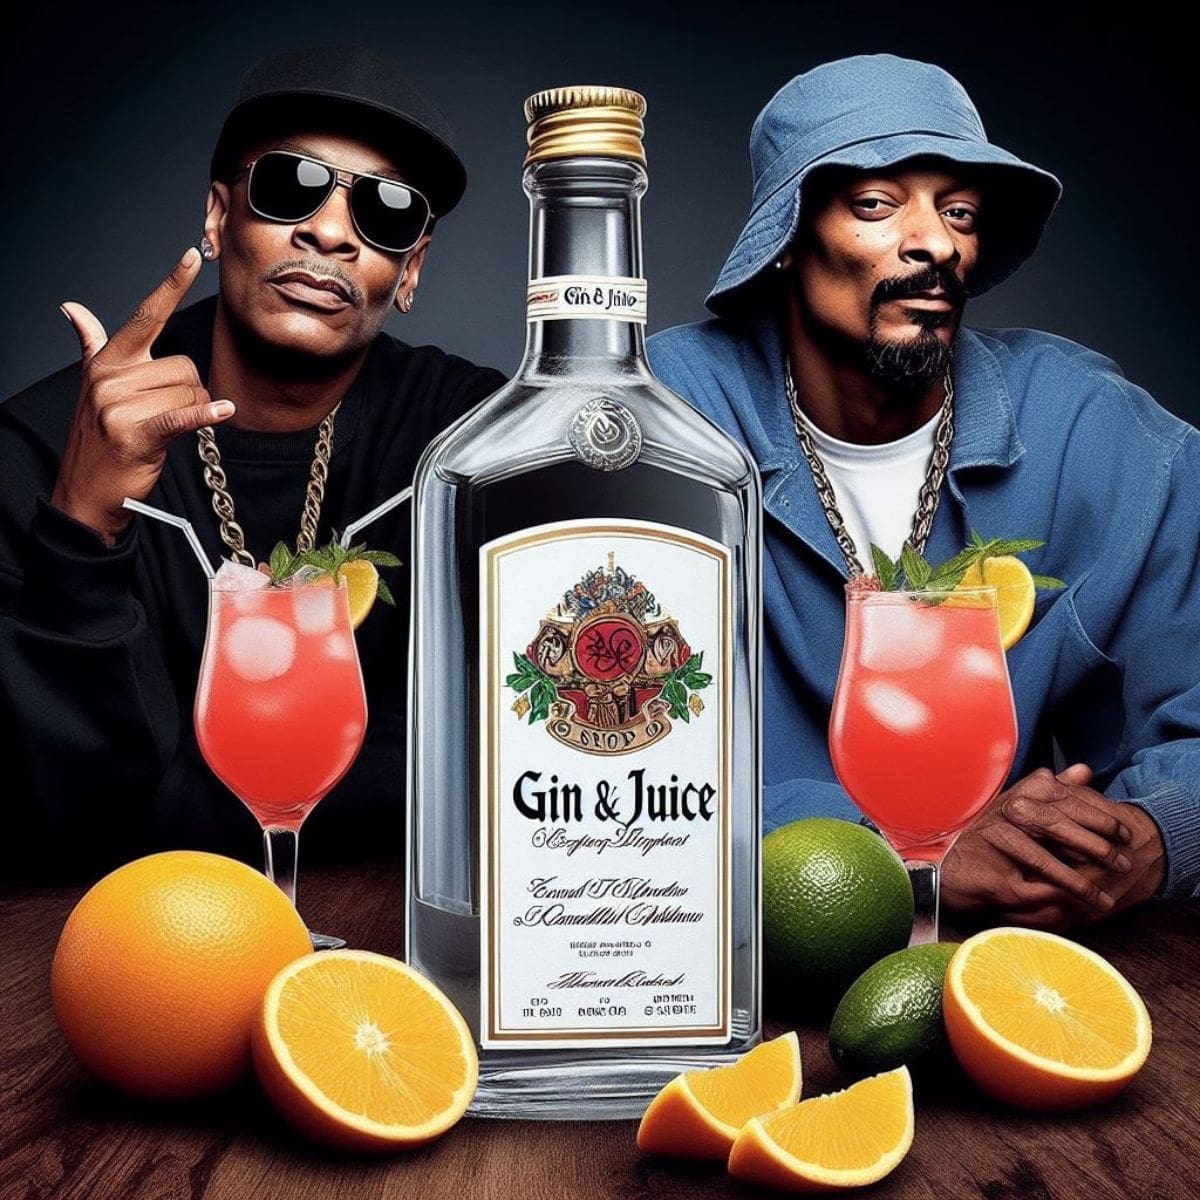 West Coast Icons Dr. Dre & Snoop Dogg Drop the Mic (and Pass the Gin & Juice!) with a Super Bowl Afterparty Surprise